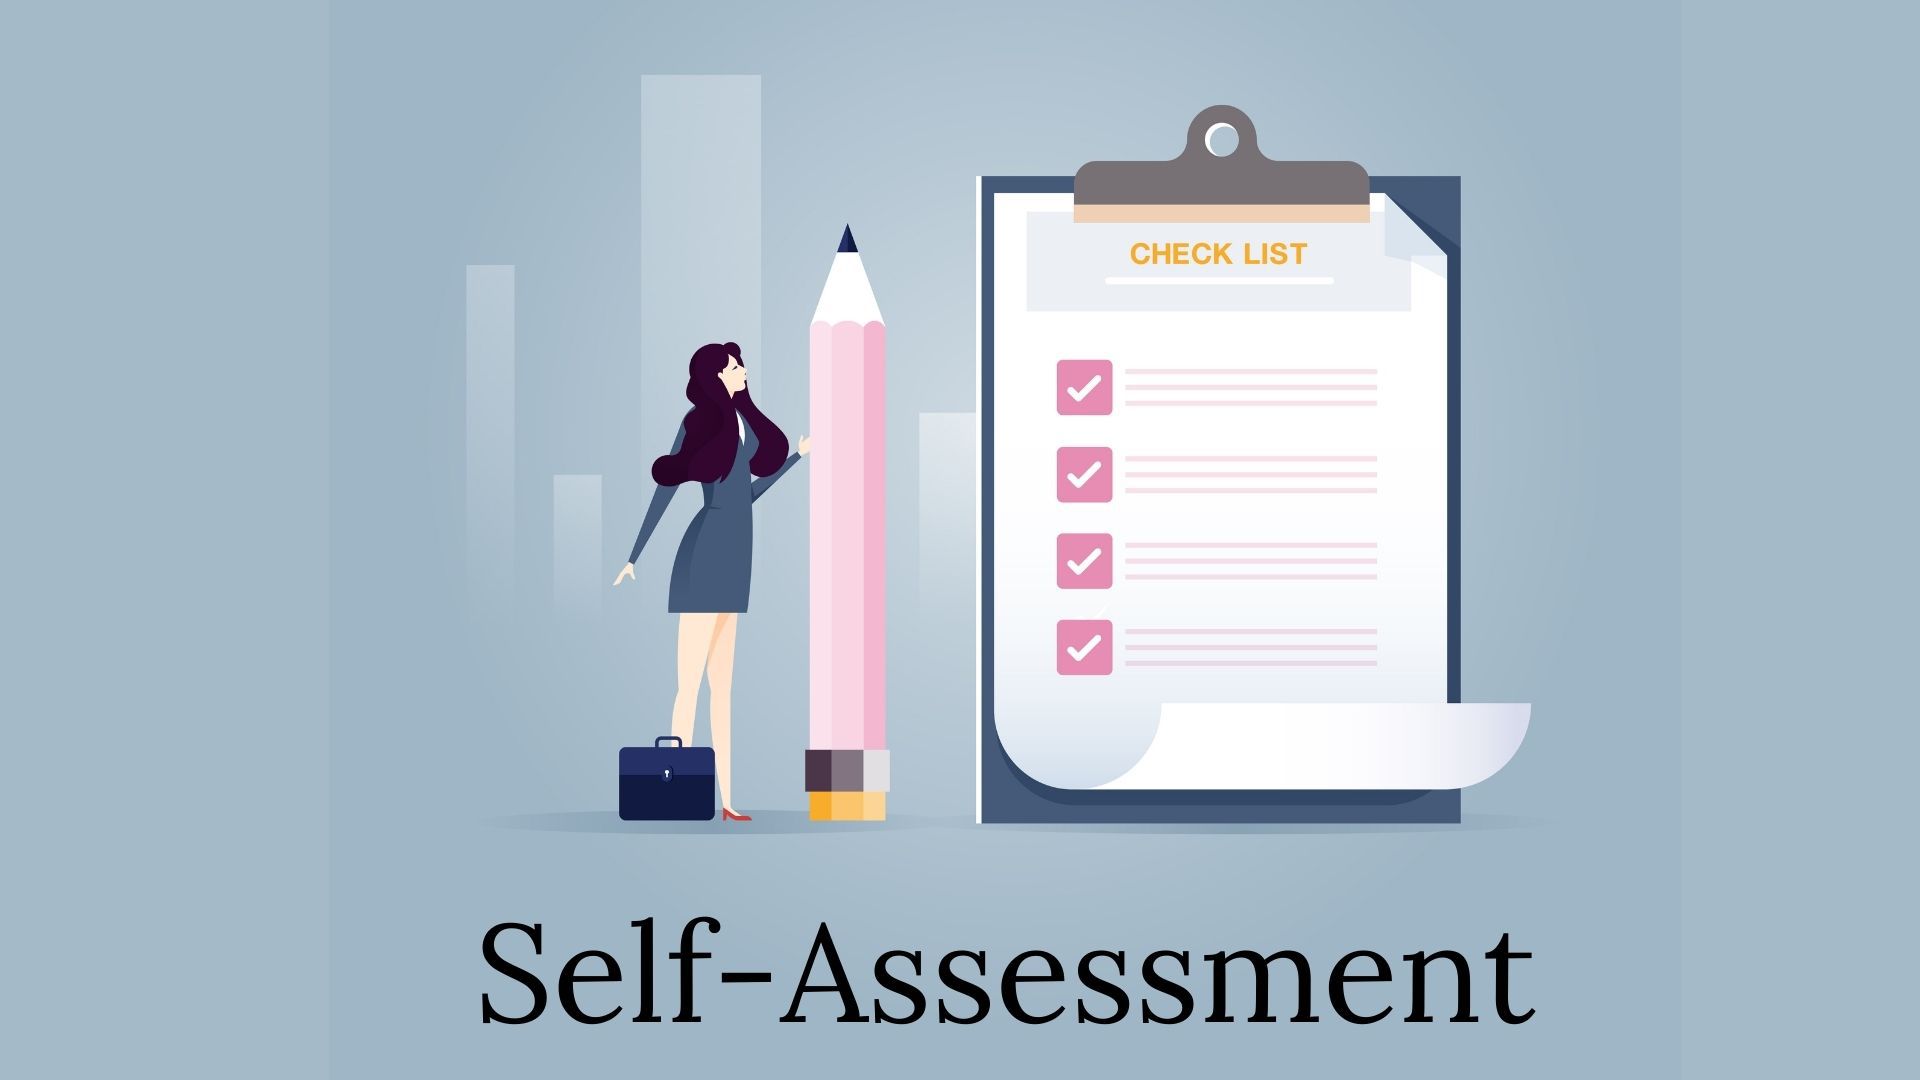 Self Assessment - Definition, Components and Advantages | Marketing91